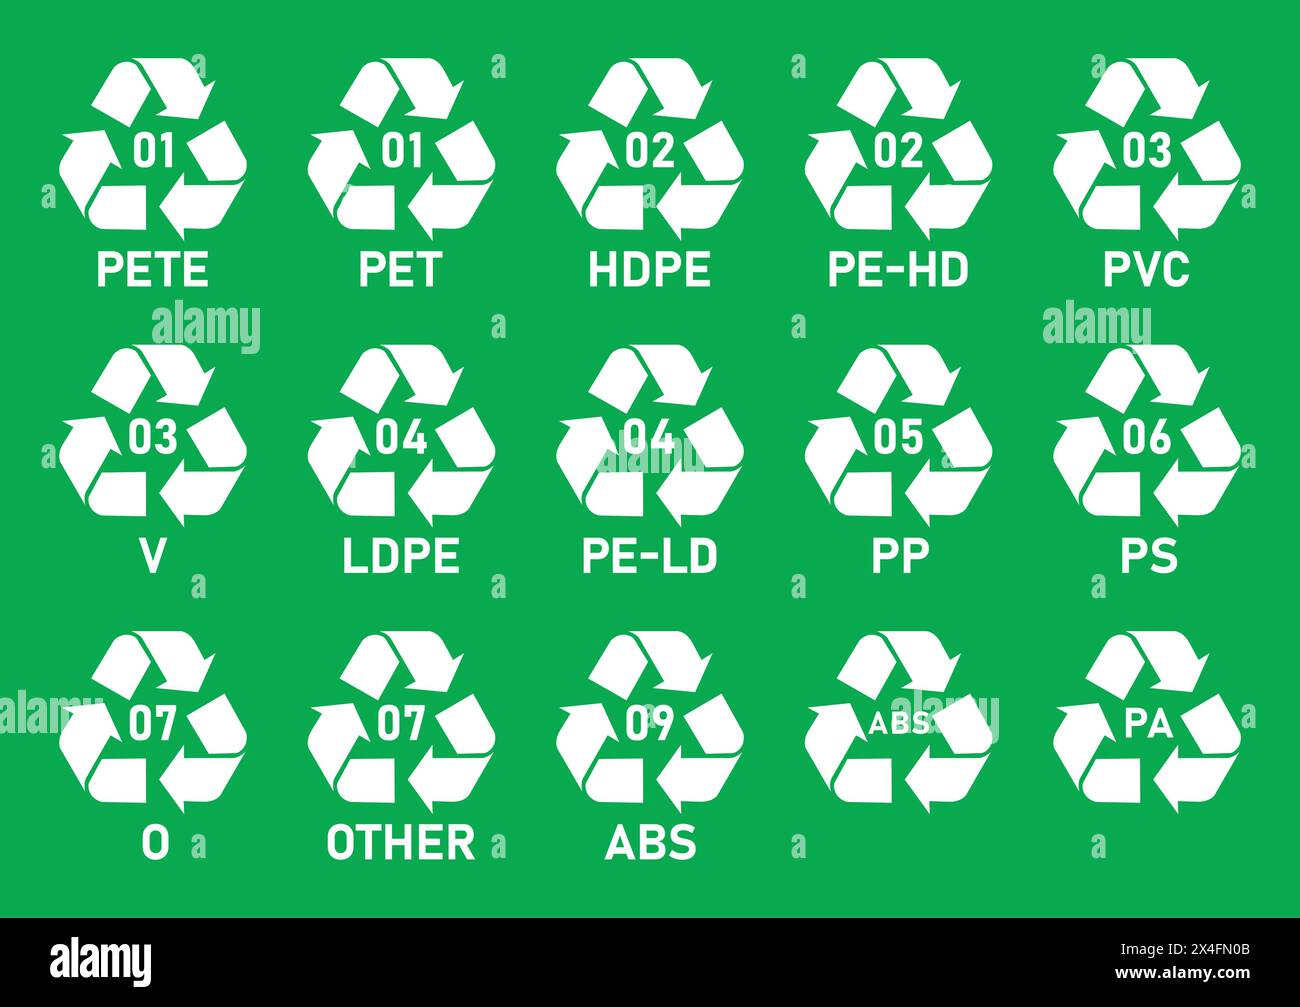 All plastic recycling code icon. Mobius strip plastic recycling code icons isolated on green background. Plastic recycling codes- 01 PET, 07 OTHER. Stock Vector